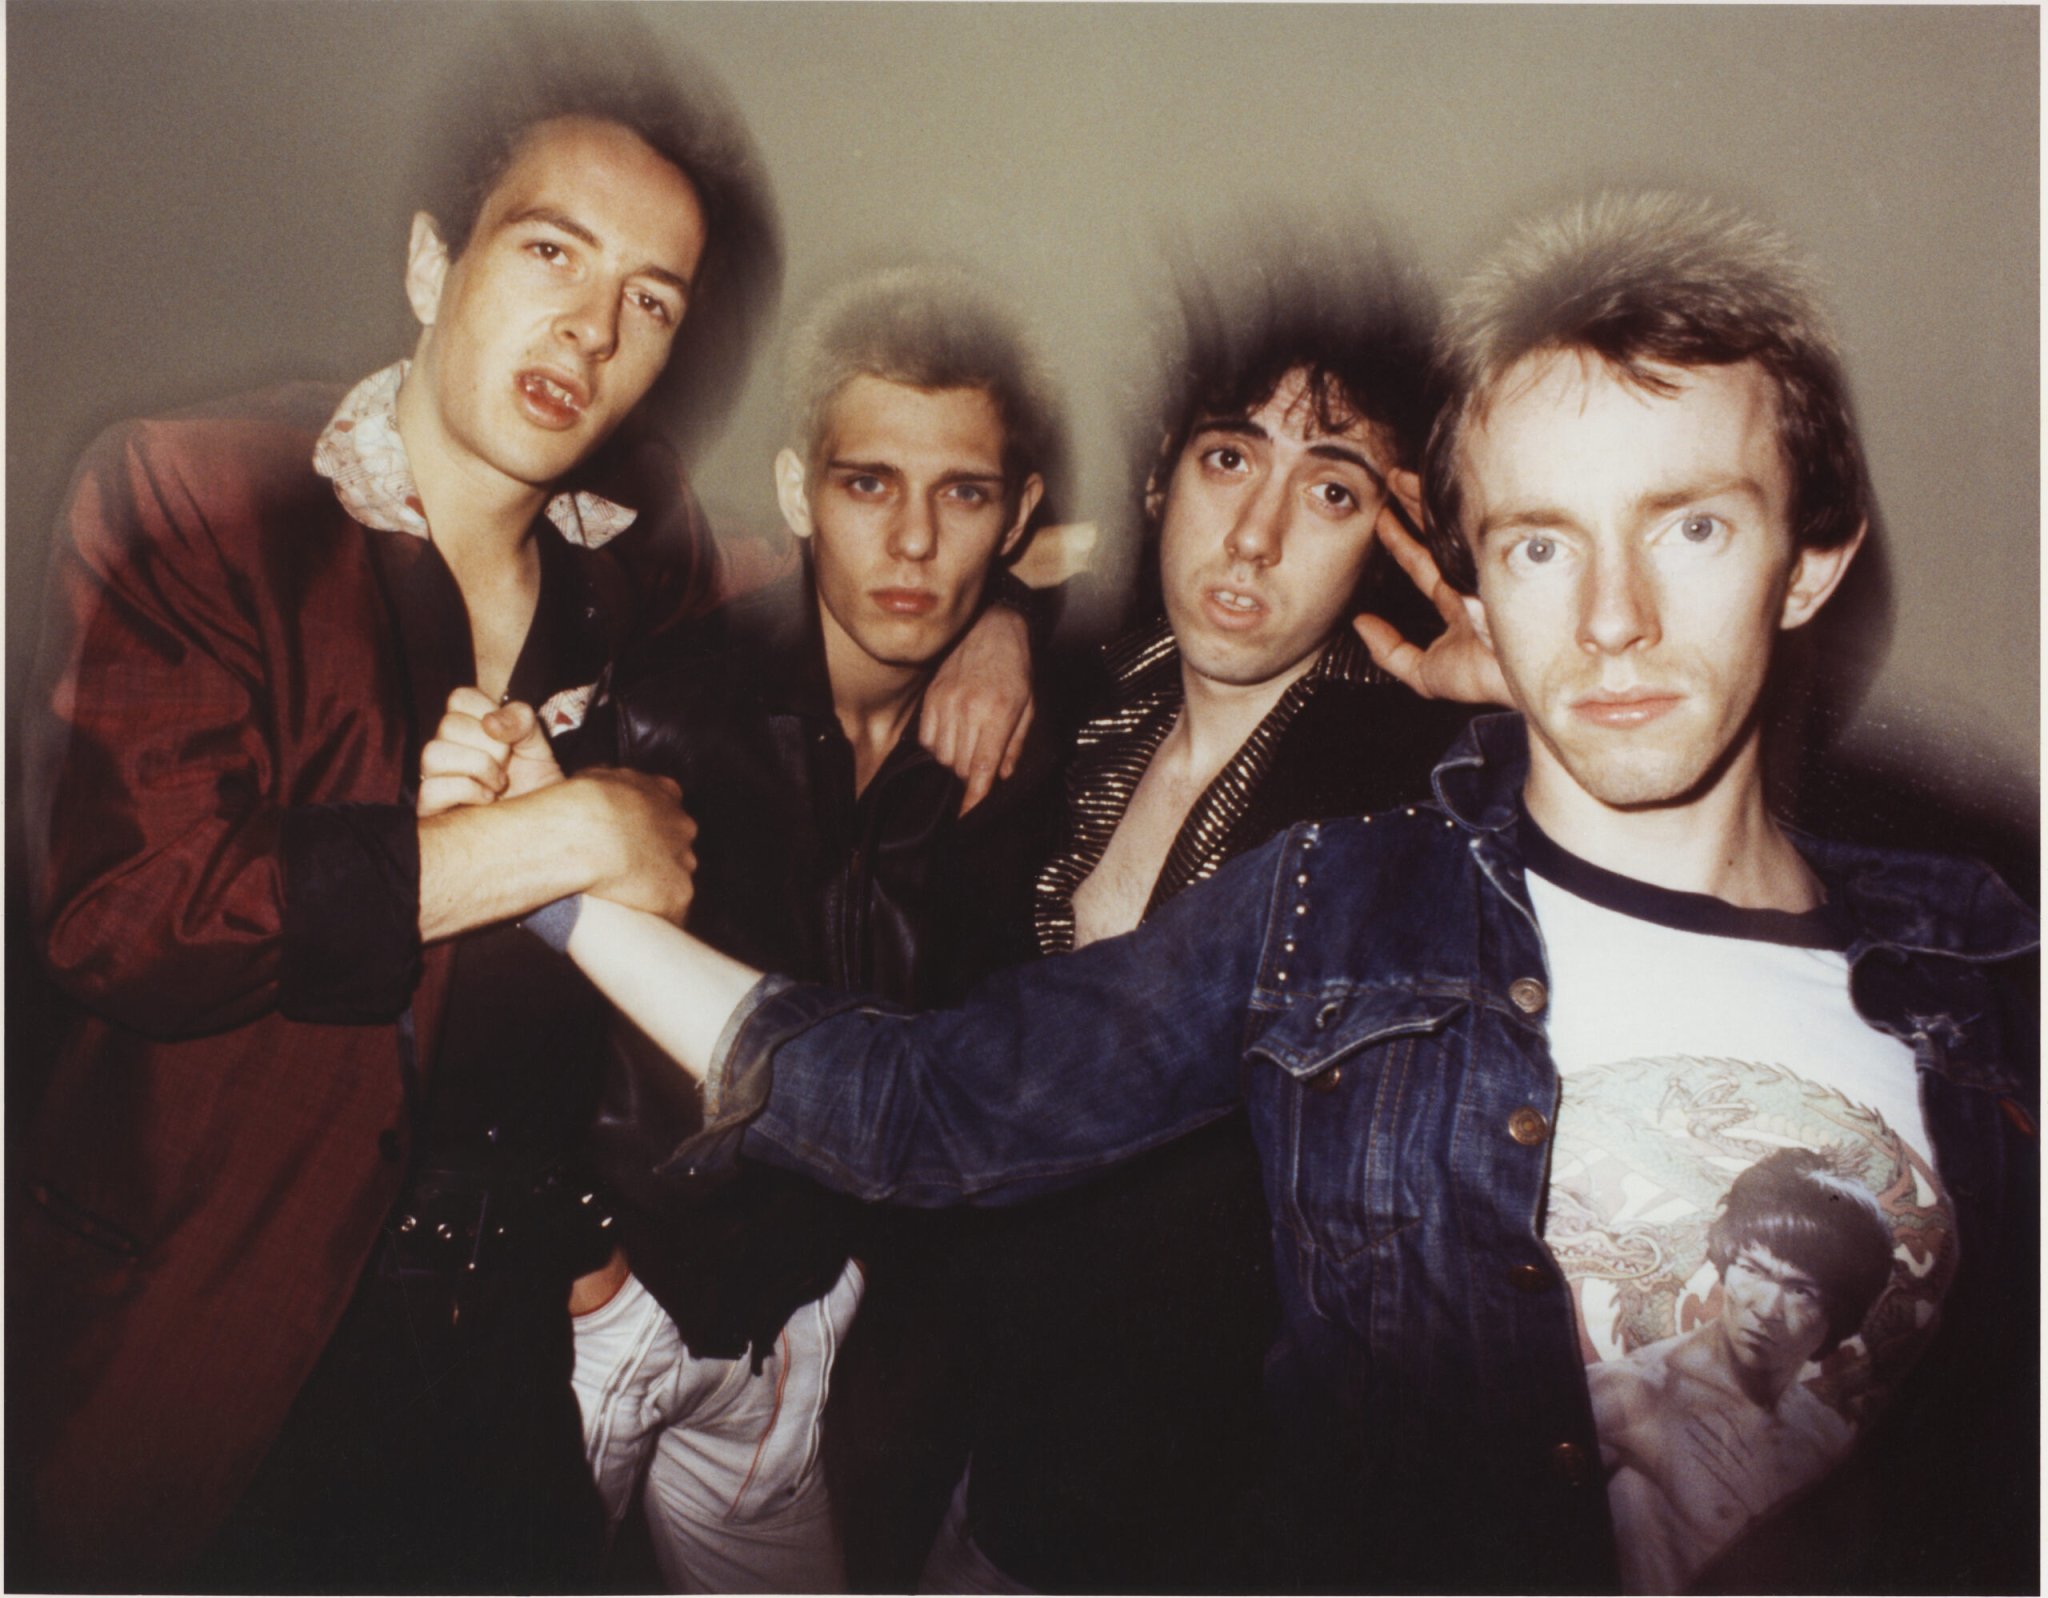 Every Album by The Clash, Ranked